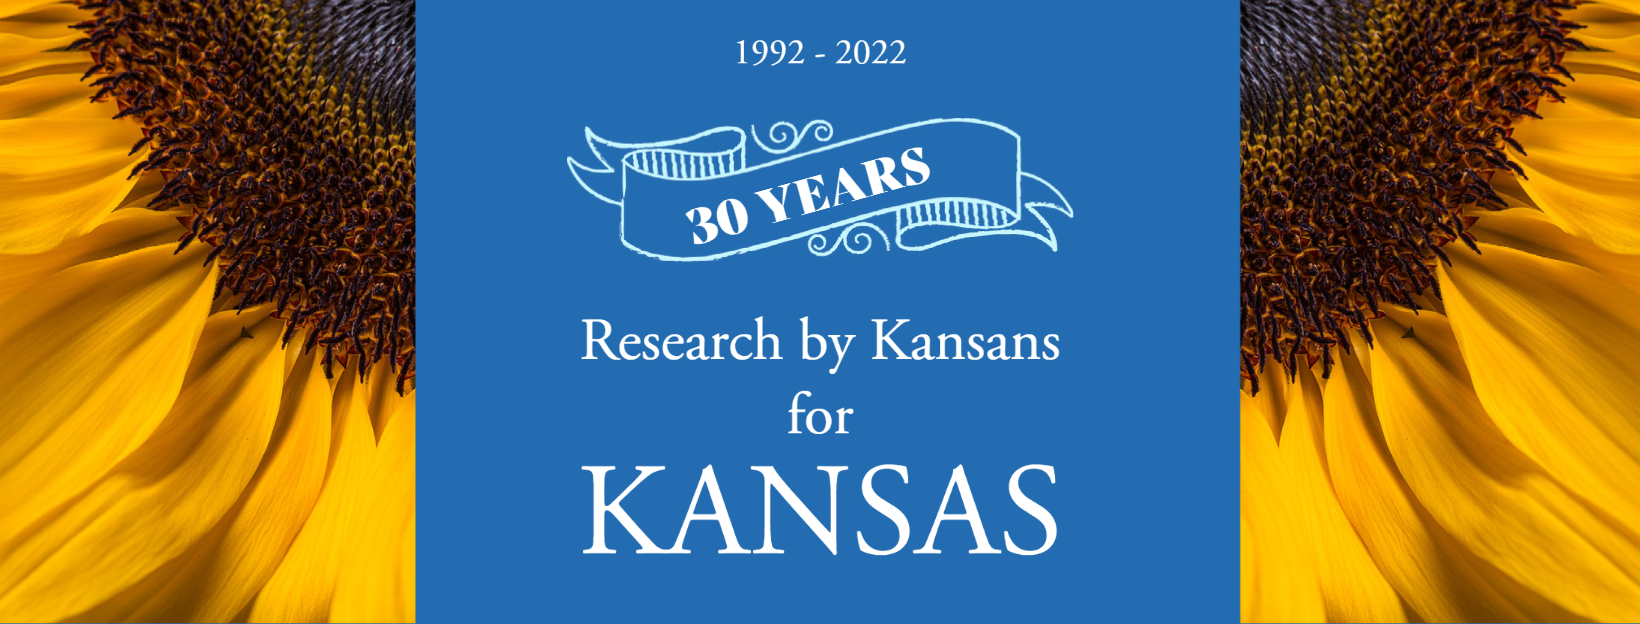 30 years of research for Kansas